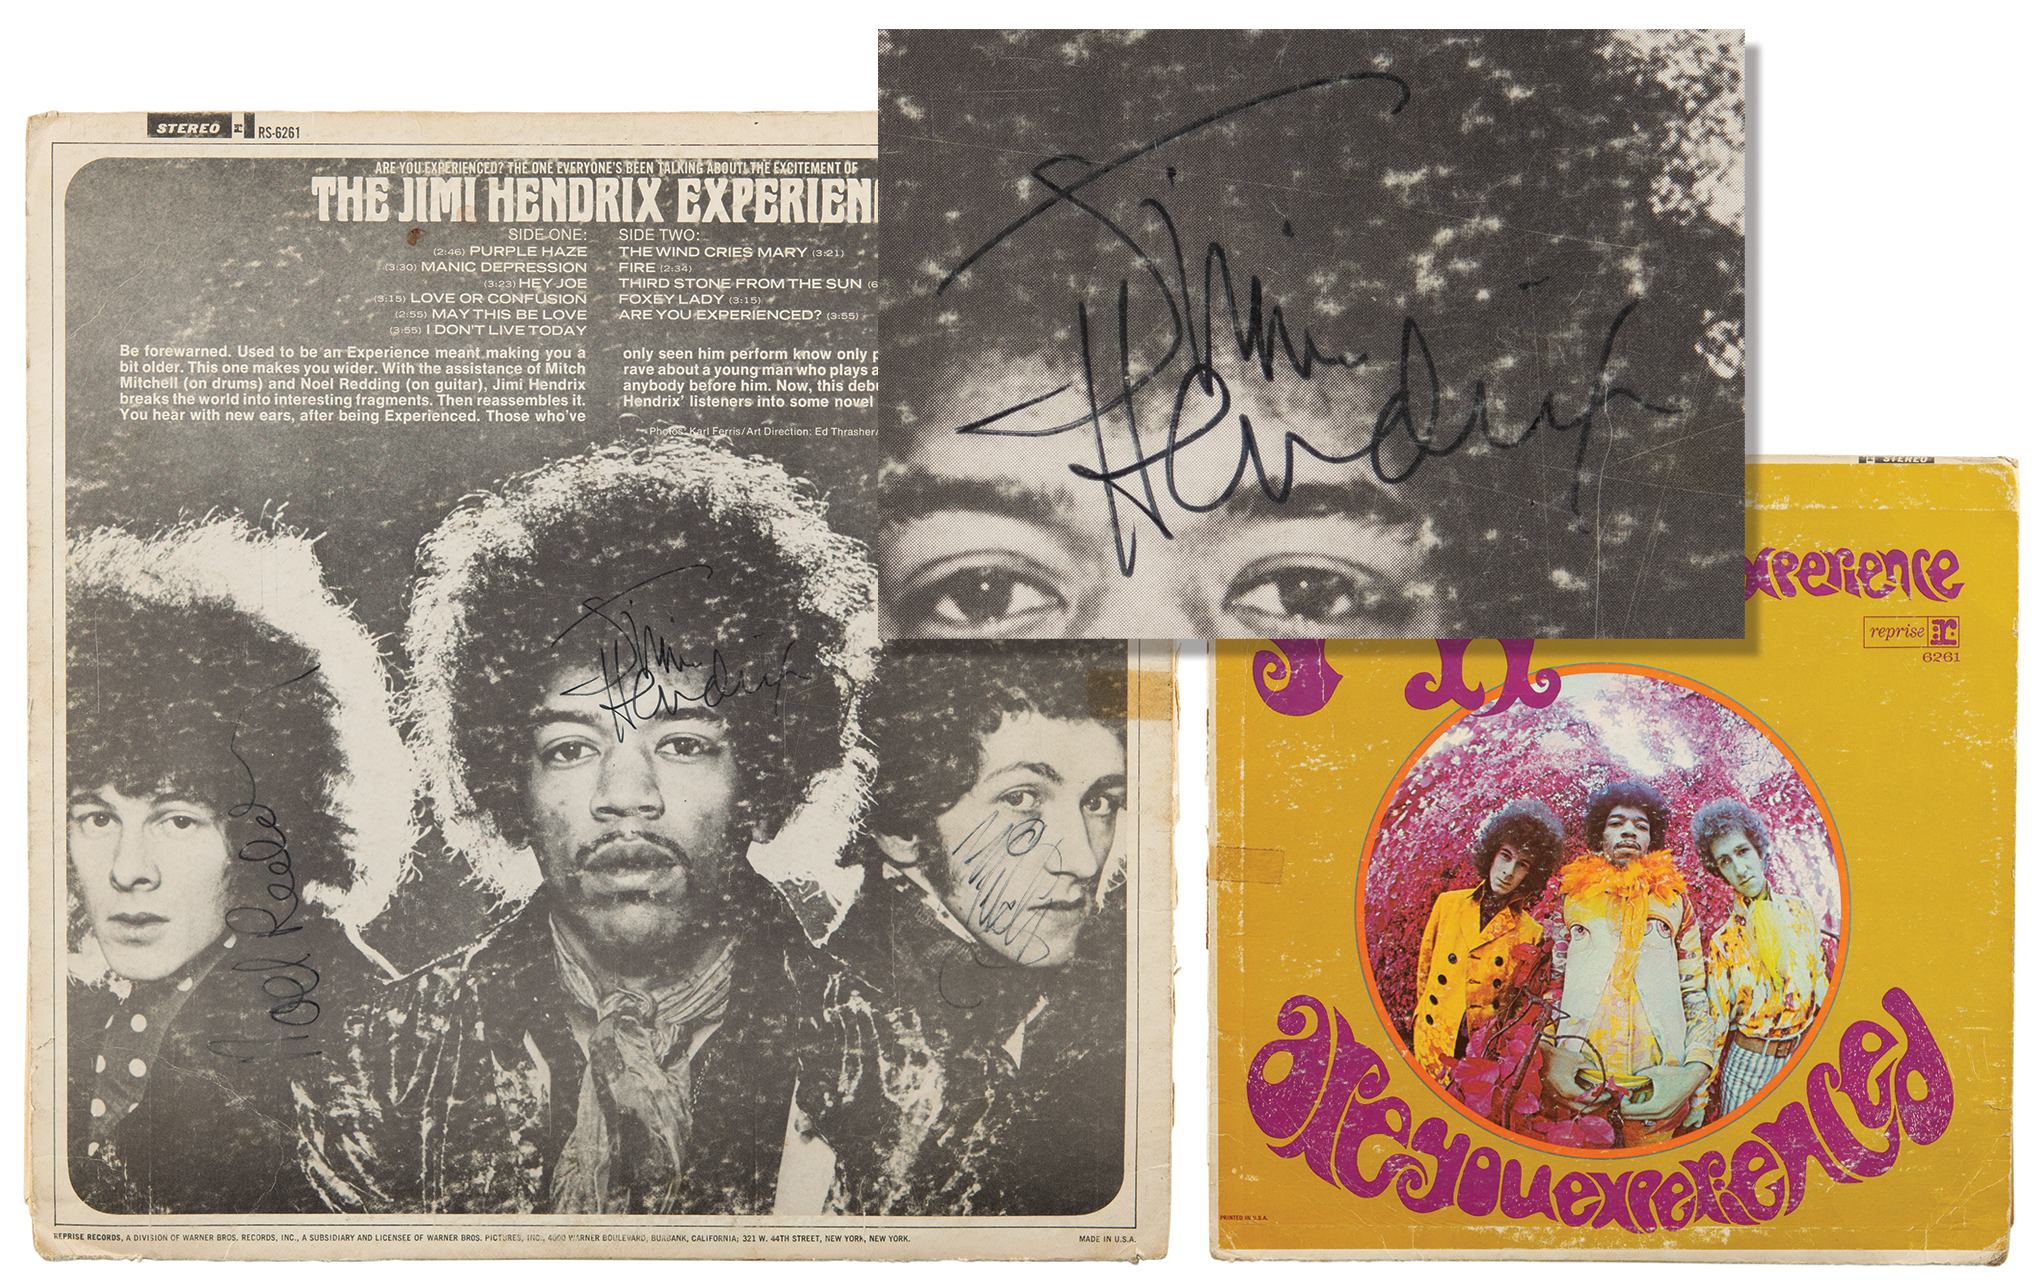 Lot #6086 Jimi Hendrix Experience Signed 'Are You Experienced' Album - Obtained at Hunter College in NYC on March 2, 1968